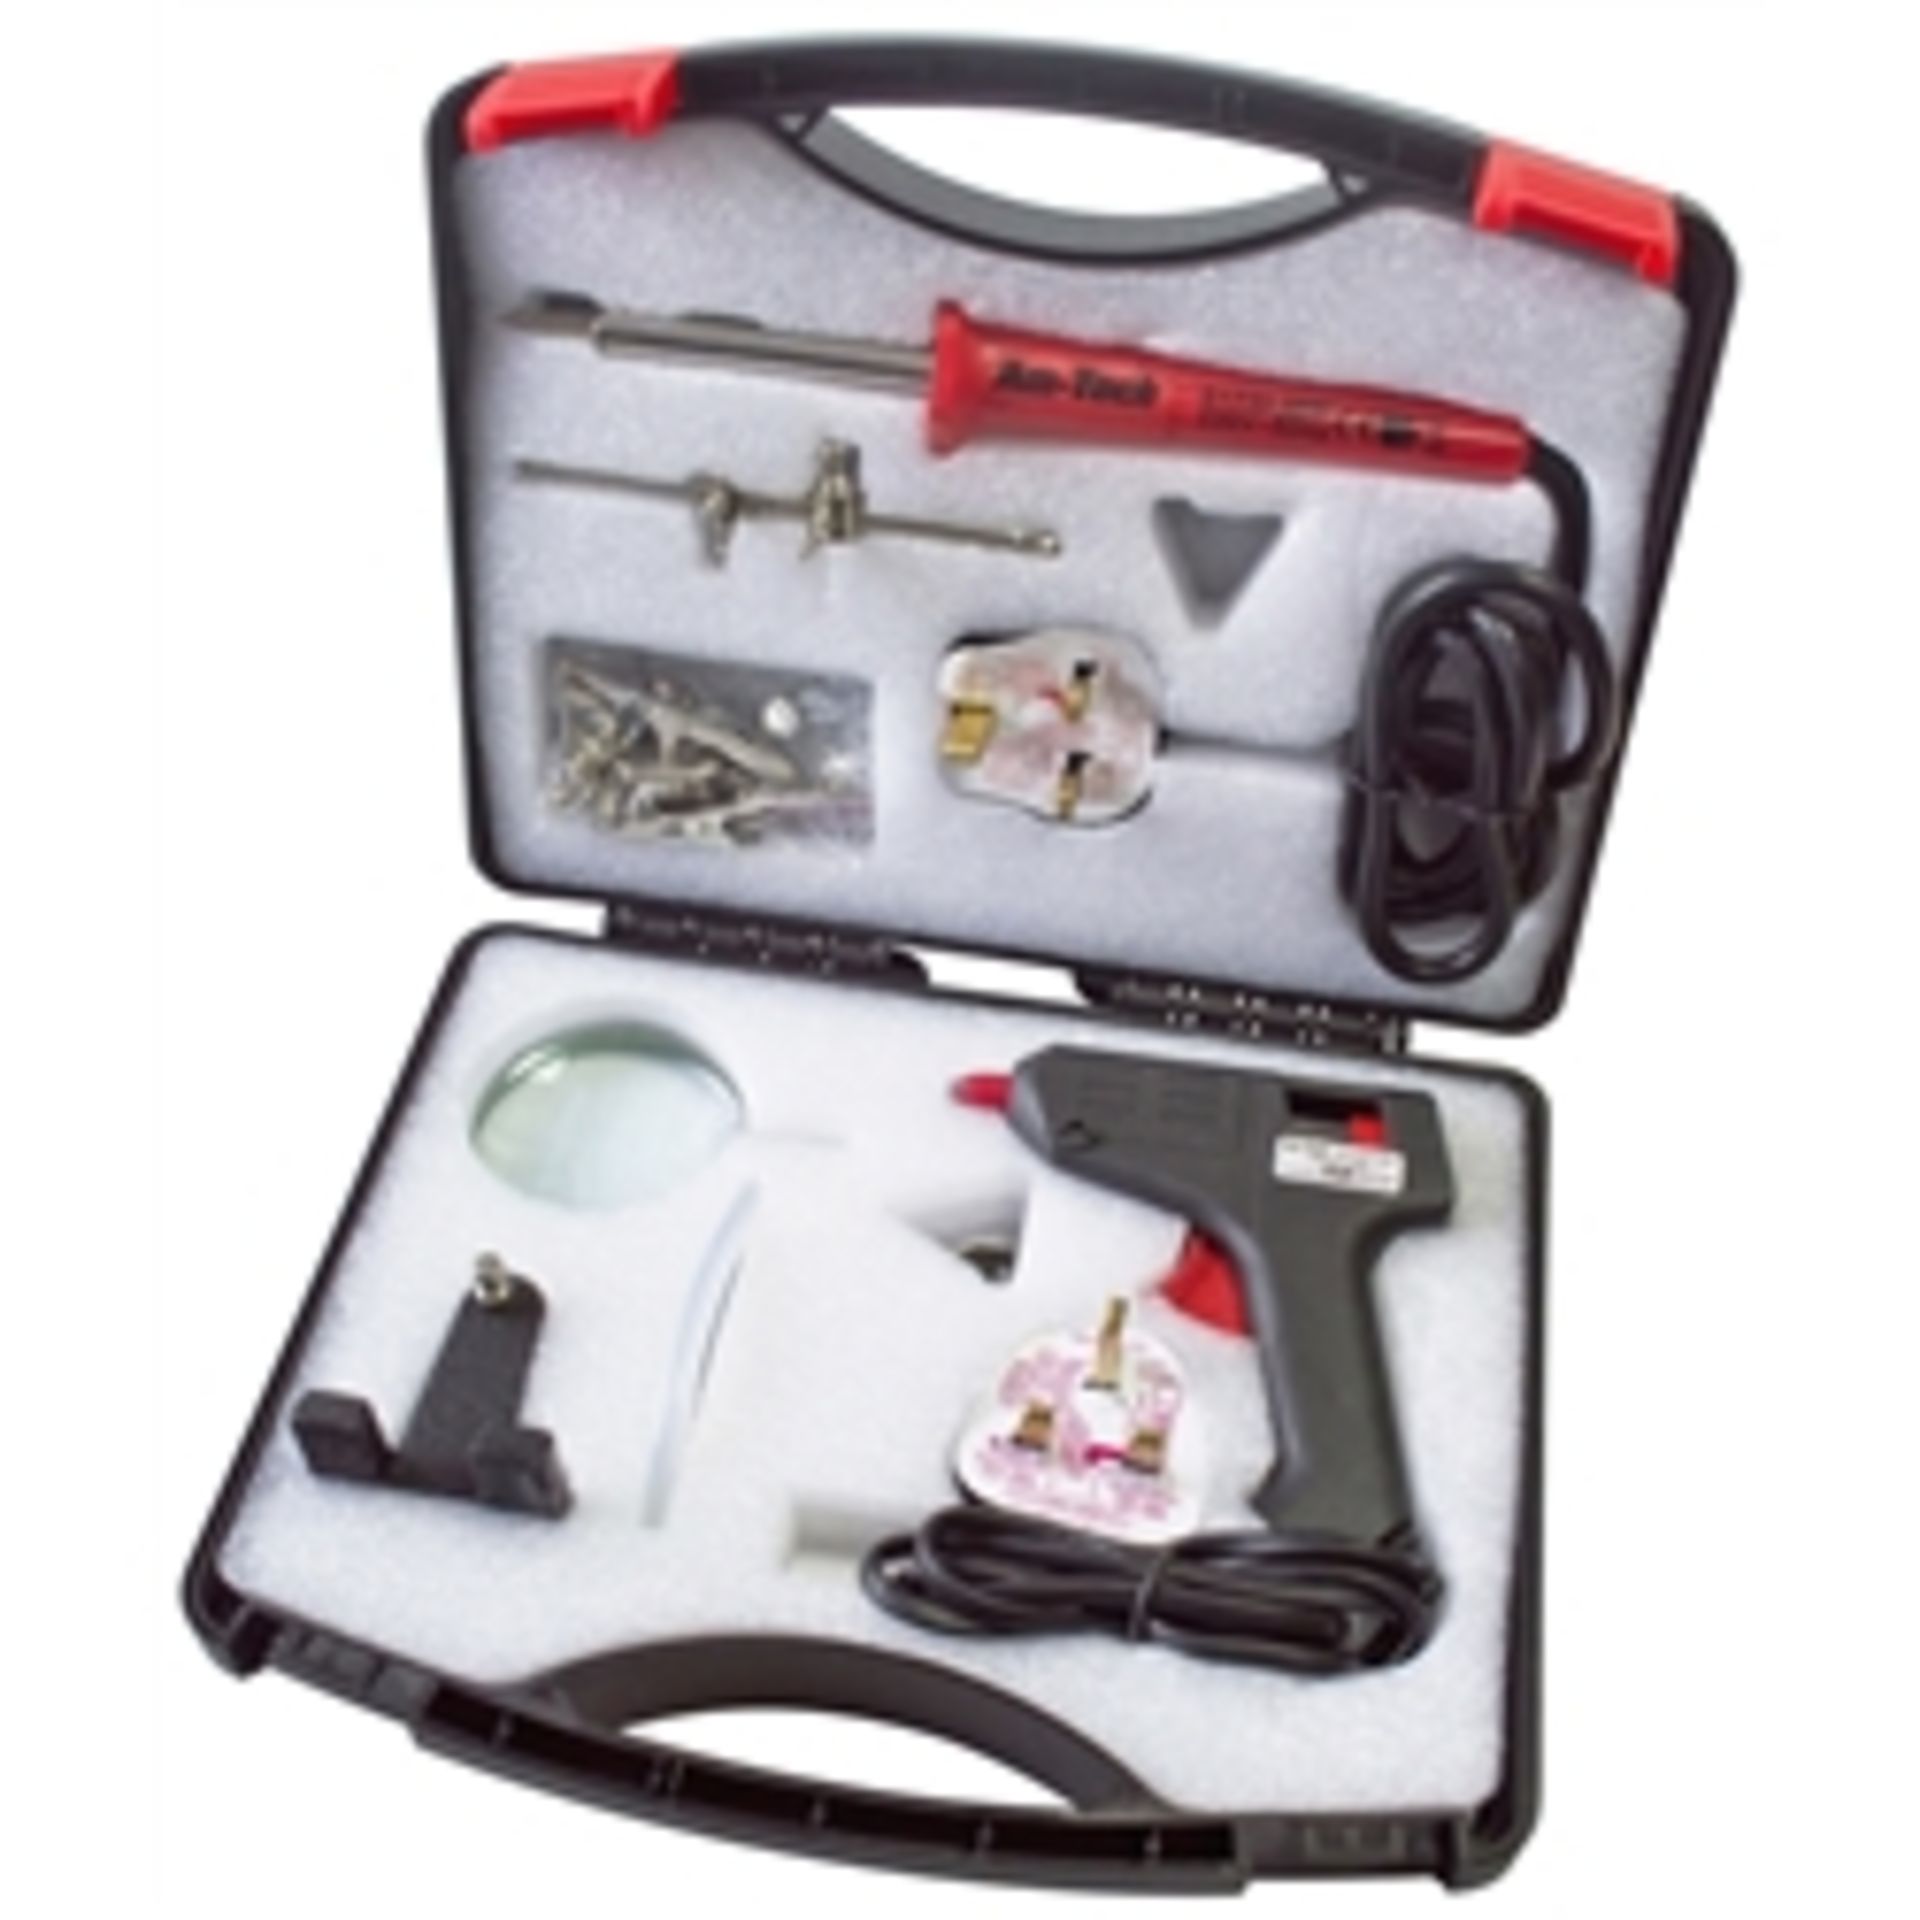 V *TRADE QTY* Brand New Soldering Gun With Accessories In Carry Case X 10 YOUR BID PRICE TO BE